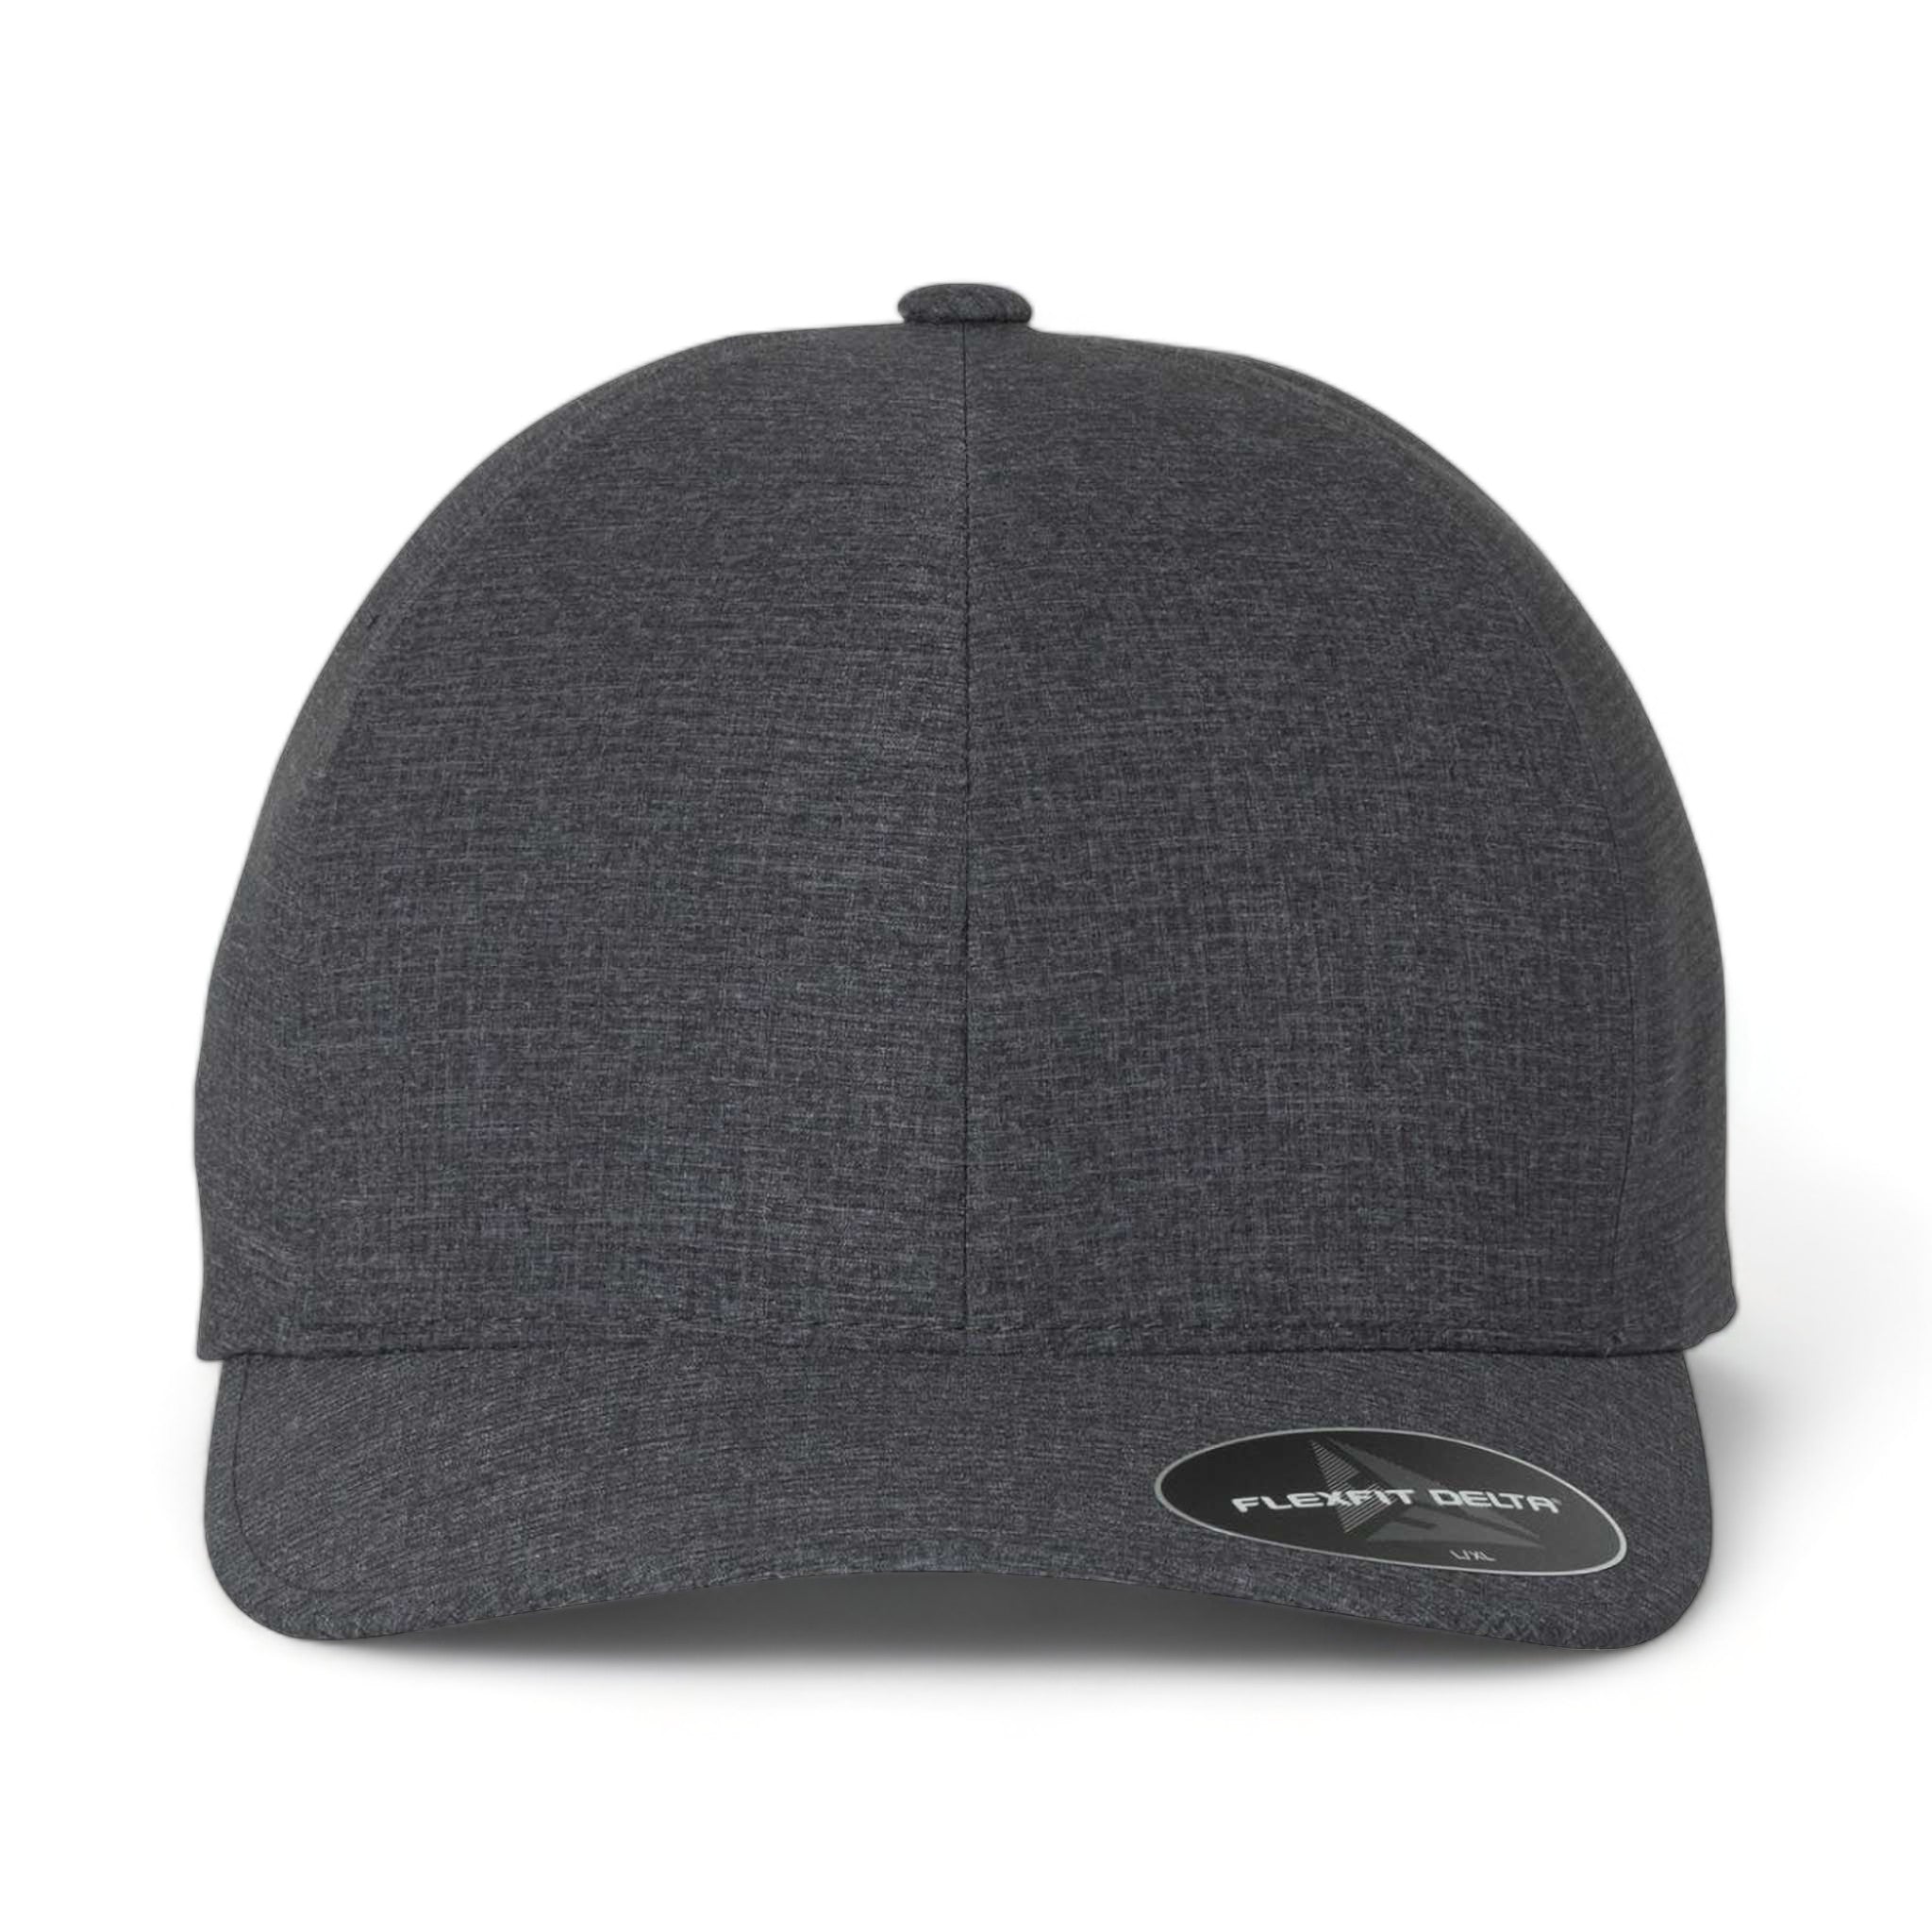 Front view of Flexfit 180 custom hat in mélange charcoal